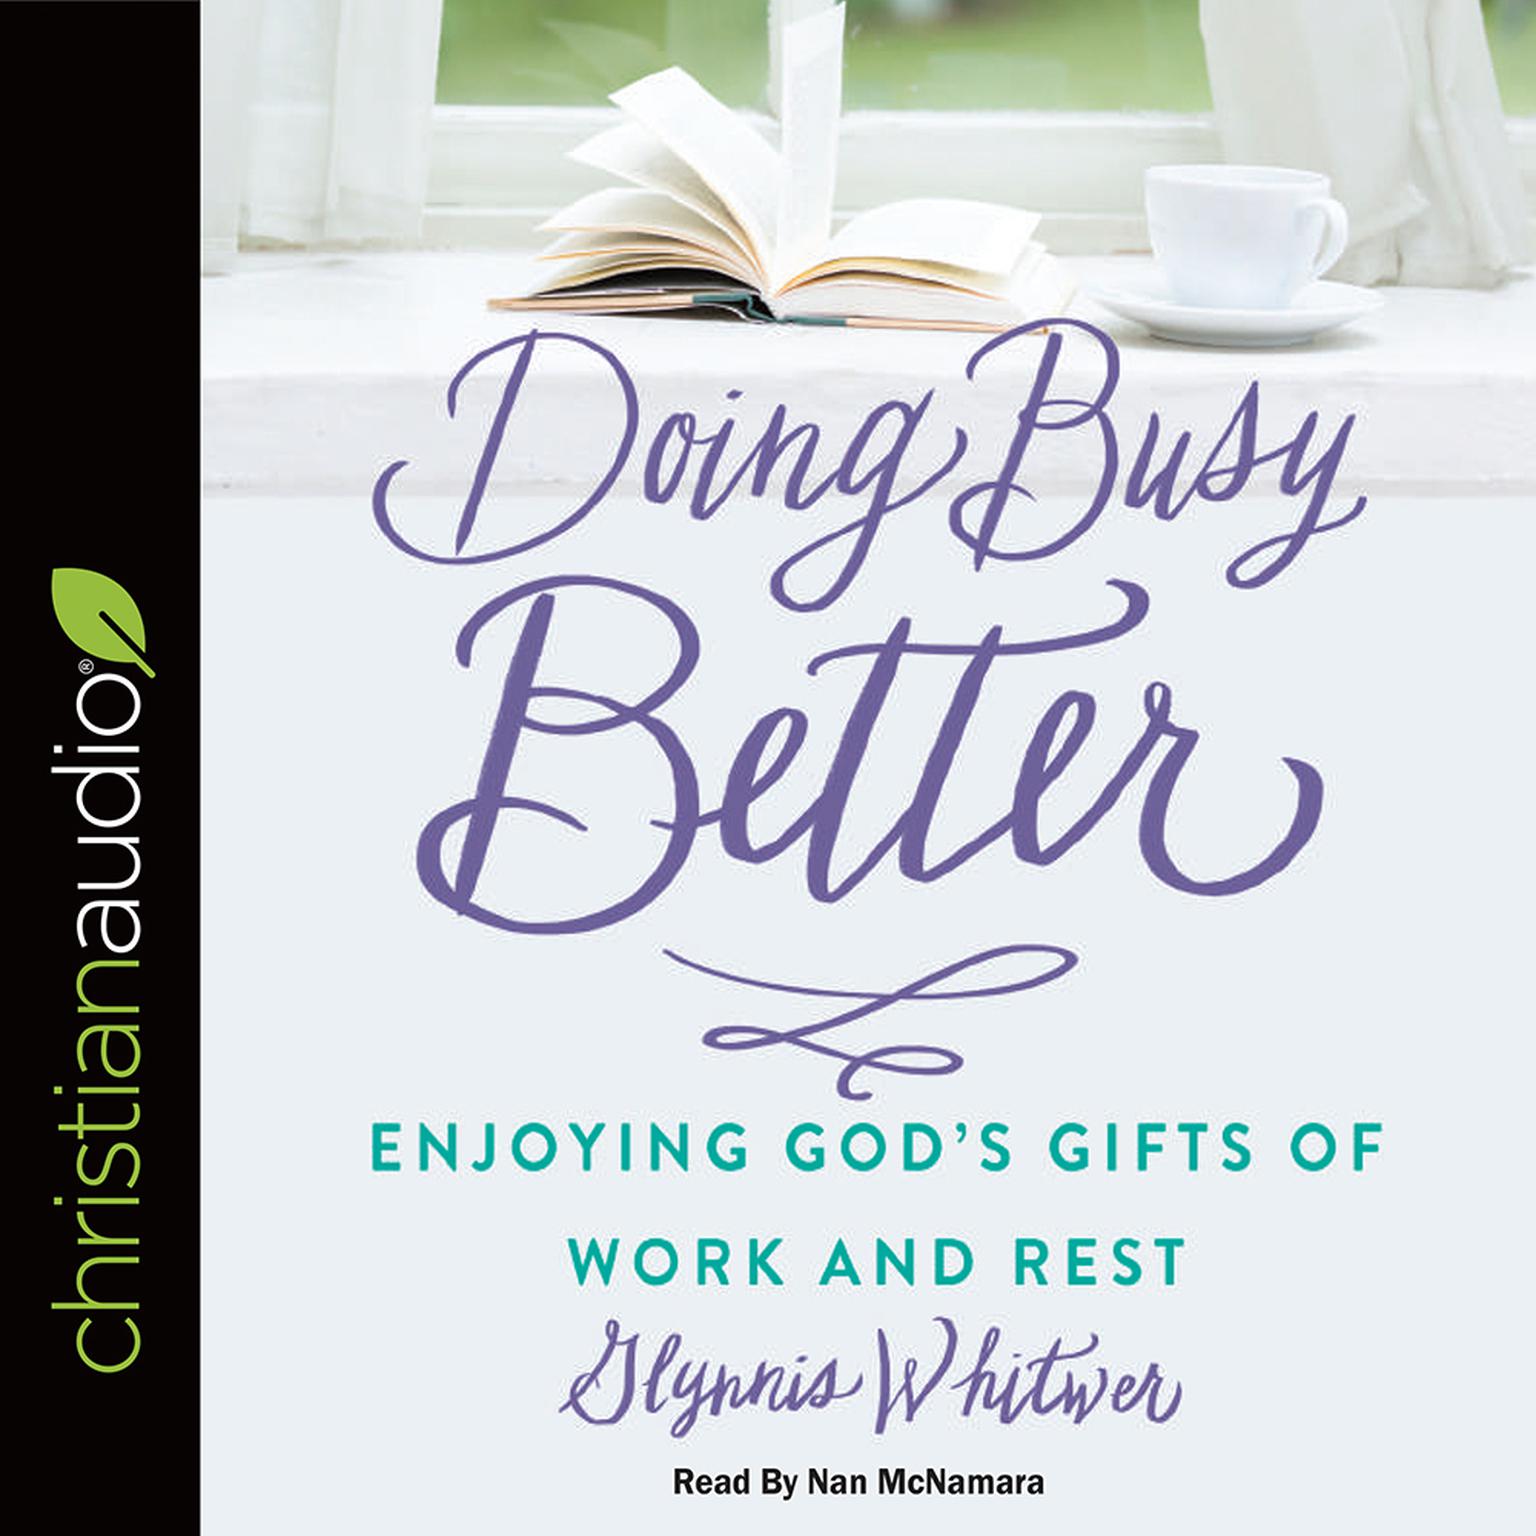 Doing Busy Better: Enjoying Gods Gifts of Work and Rest Audiobook, by Glynnis Whitwer